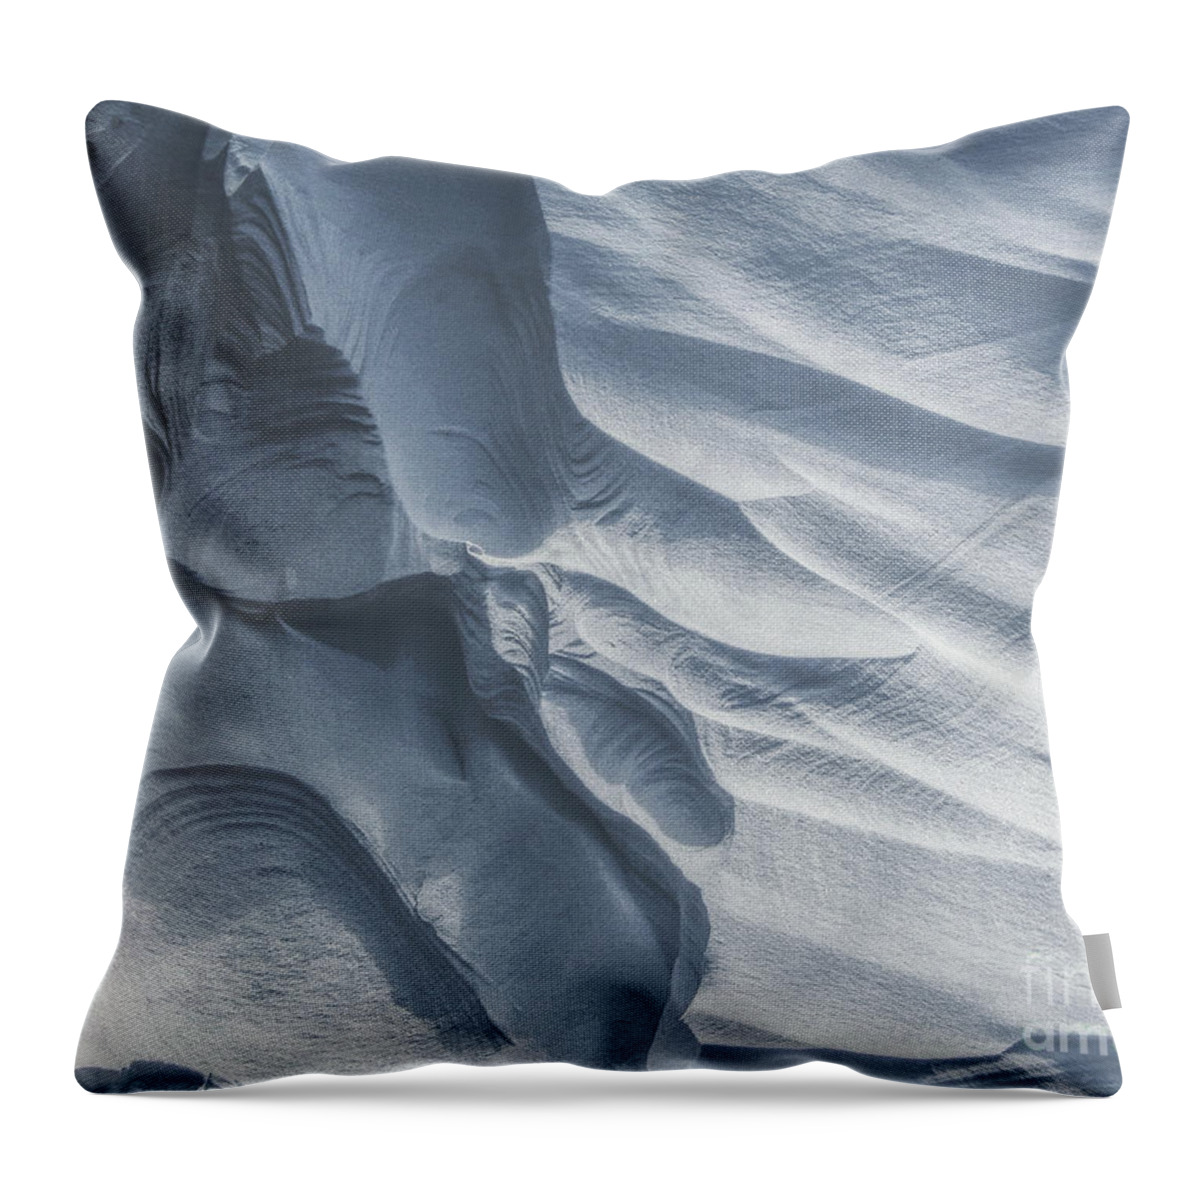 Winter Throw Pillow featuring the photograph Snow Sculpted By Wind by Phil Perkins